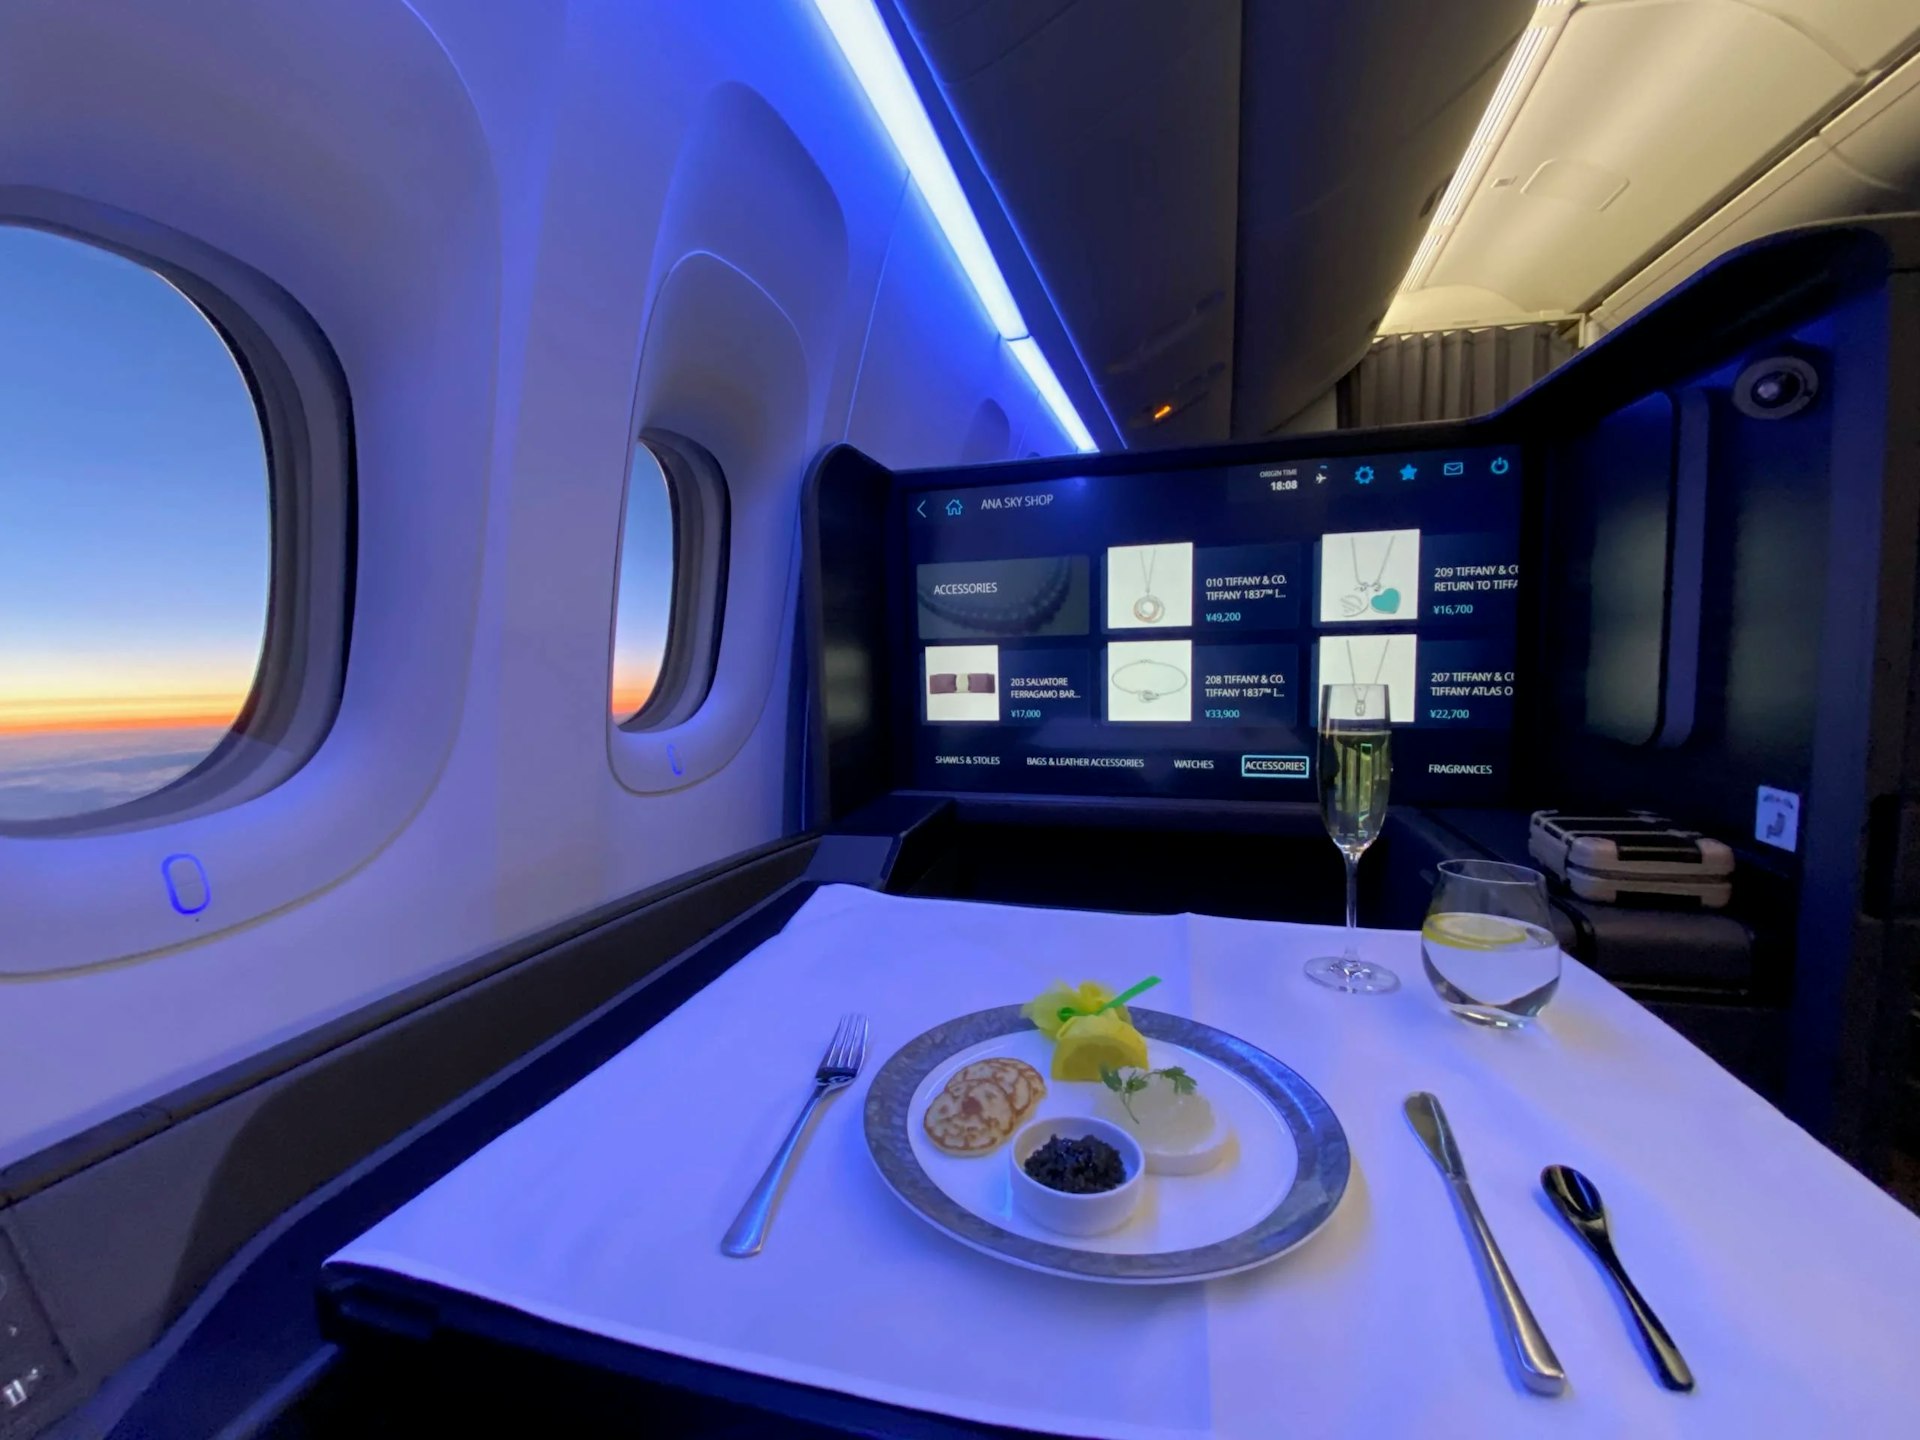 The first class suite of ANA, All Nippon Airways